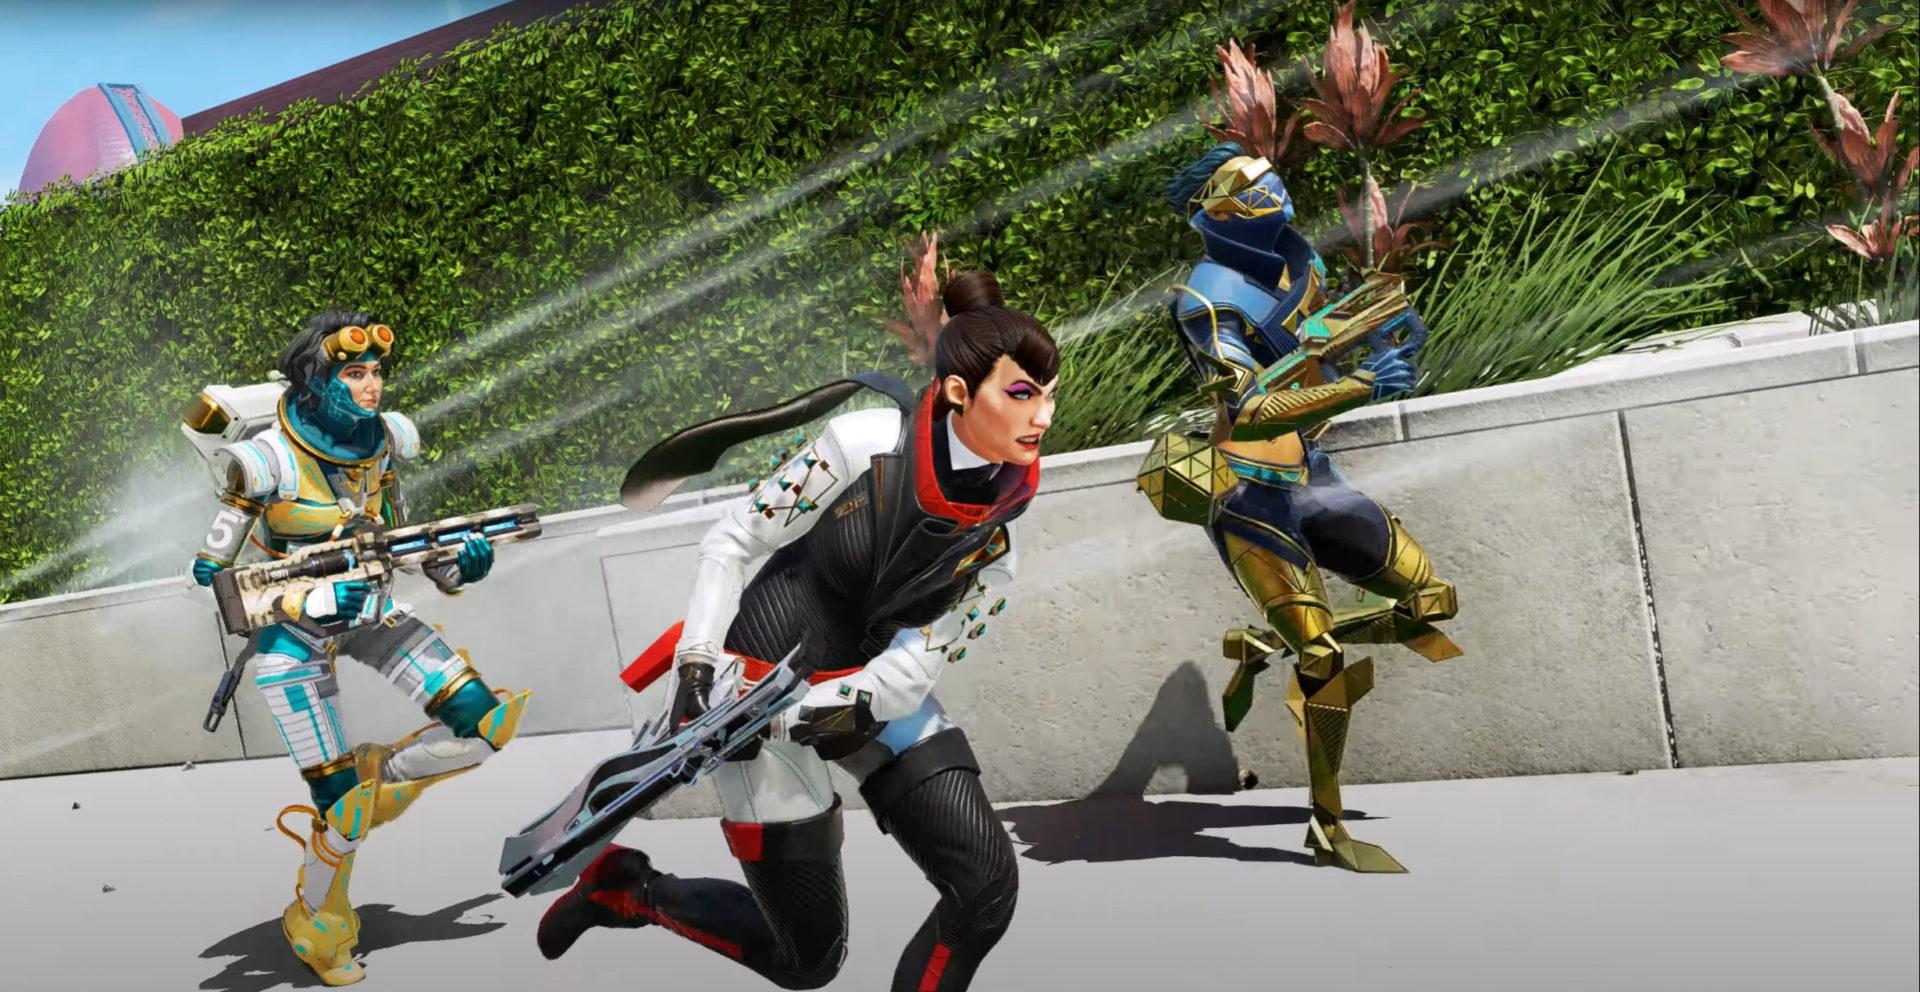 Legends running towards right side of image with weapons drawn and bushes behind them